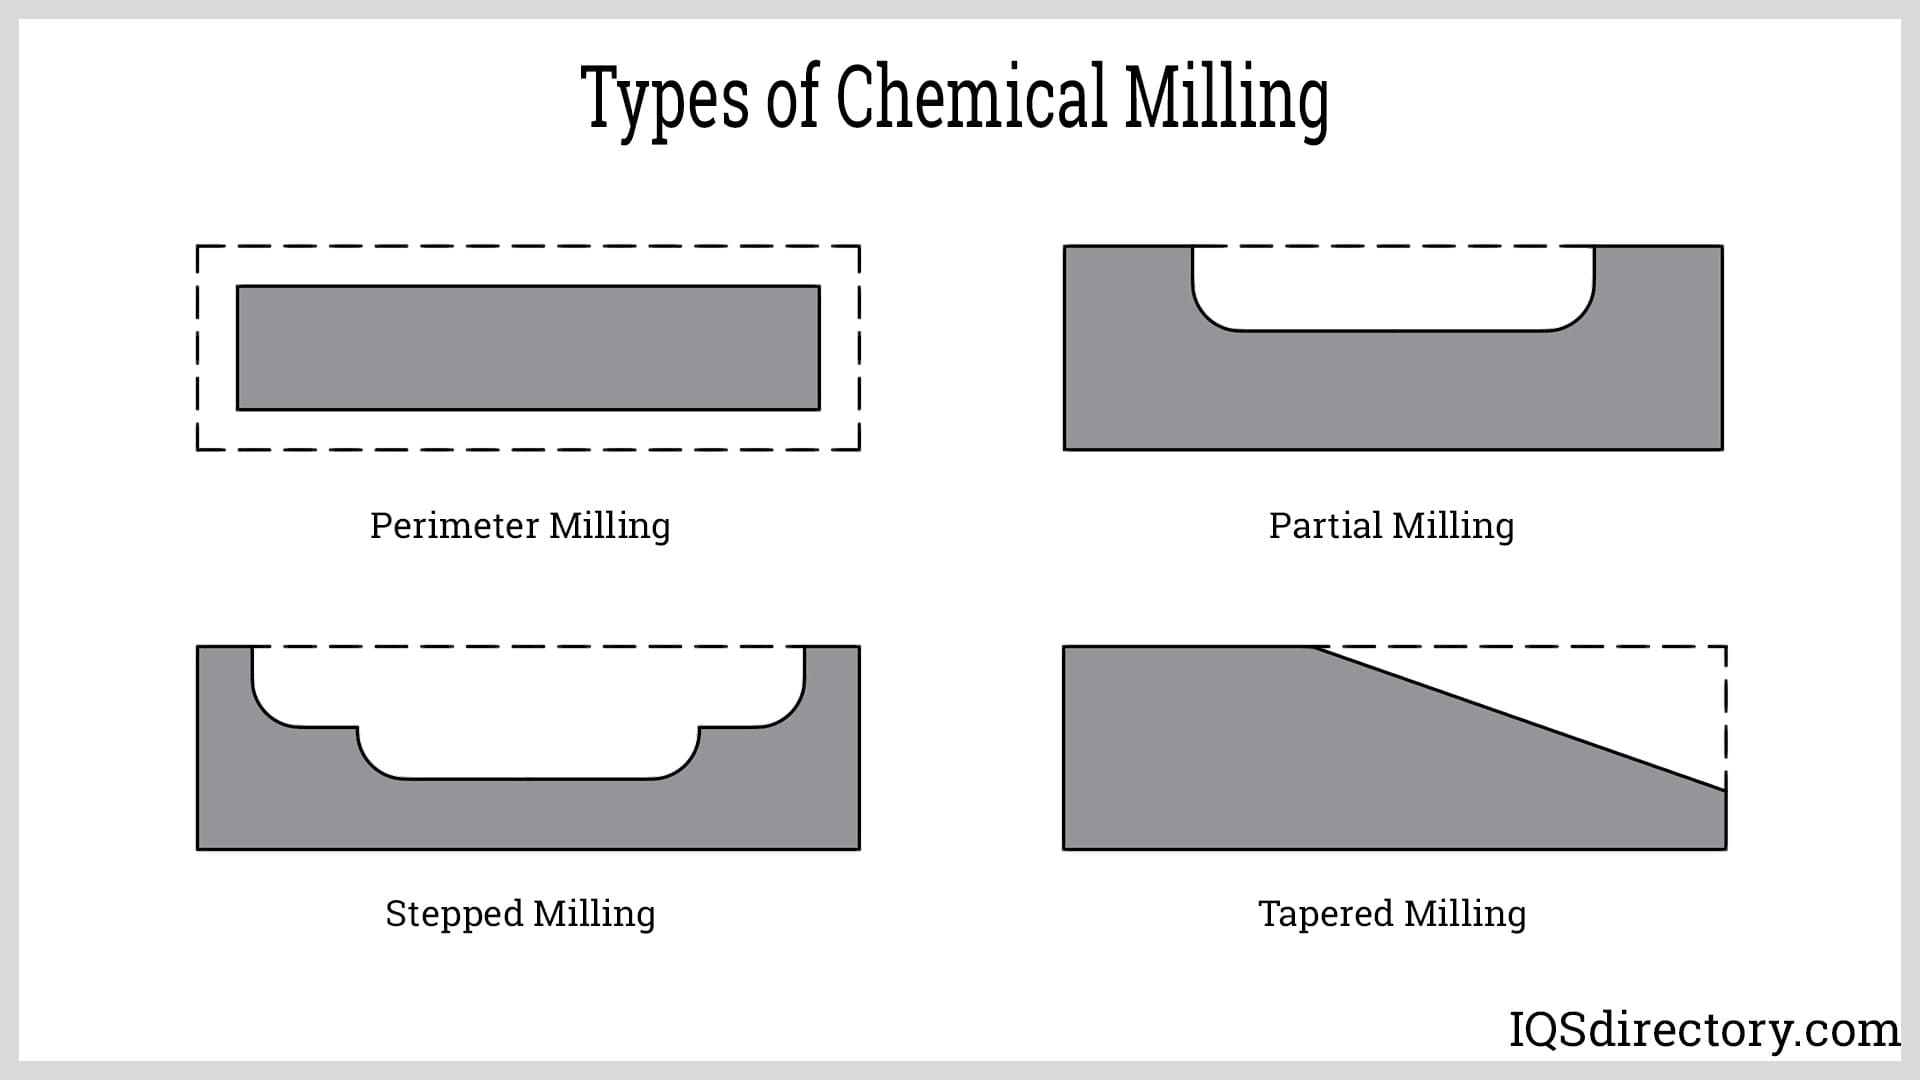 Types of Chemical Milling